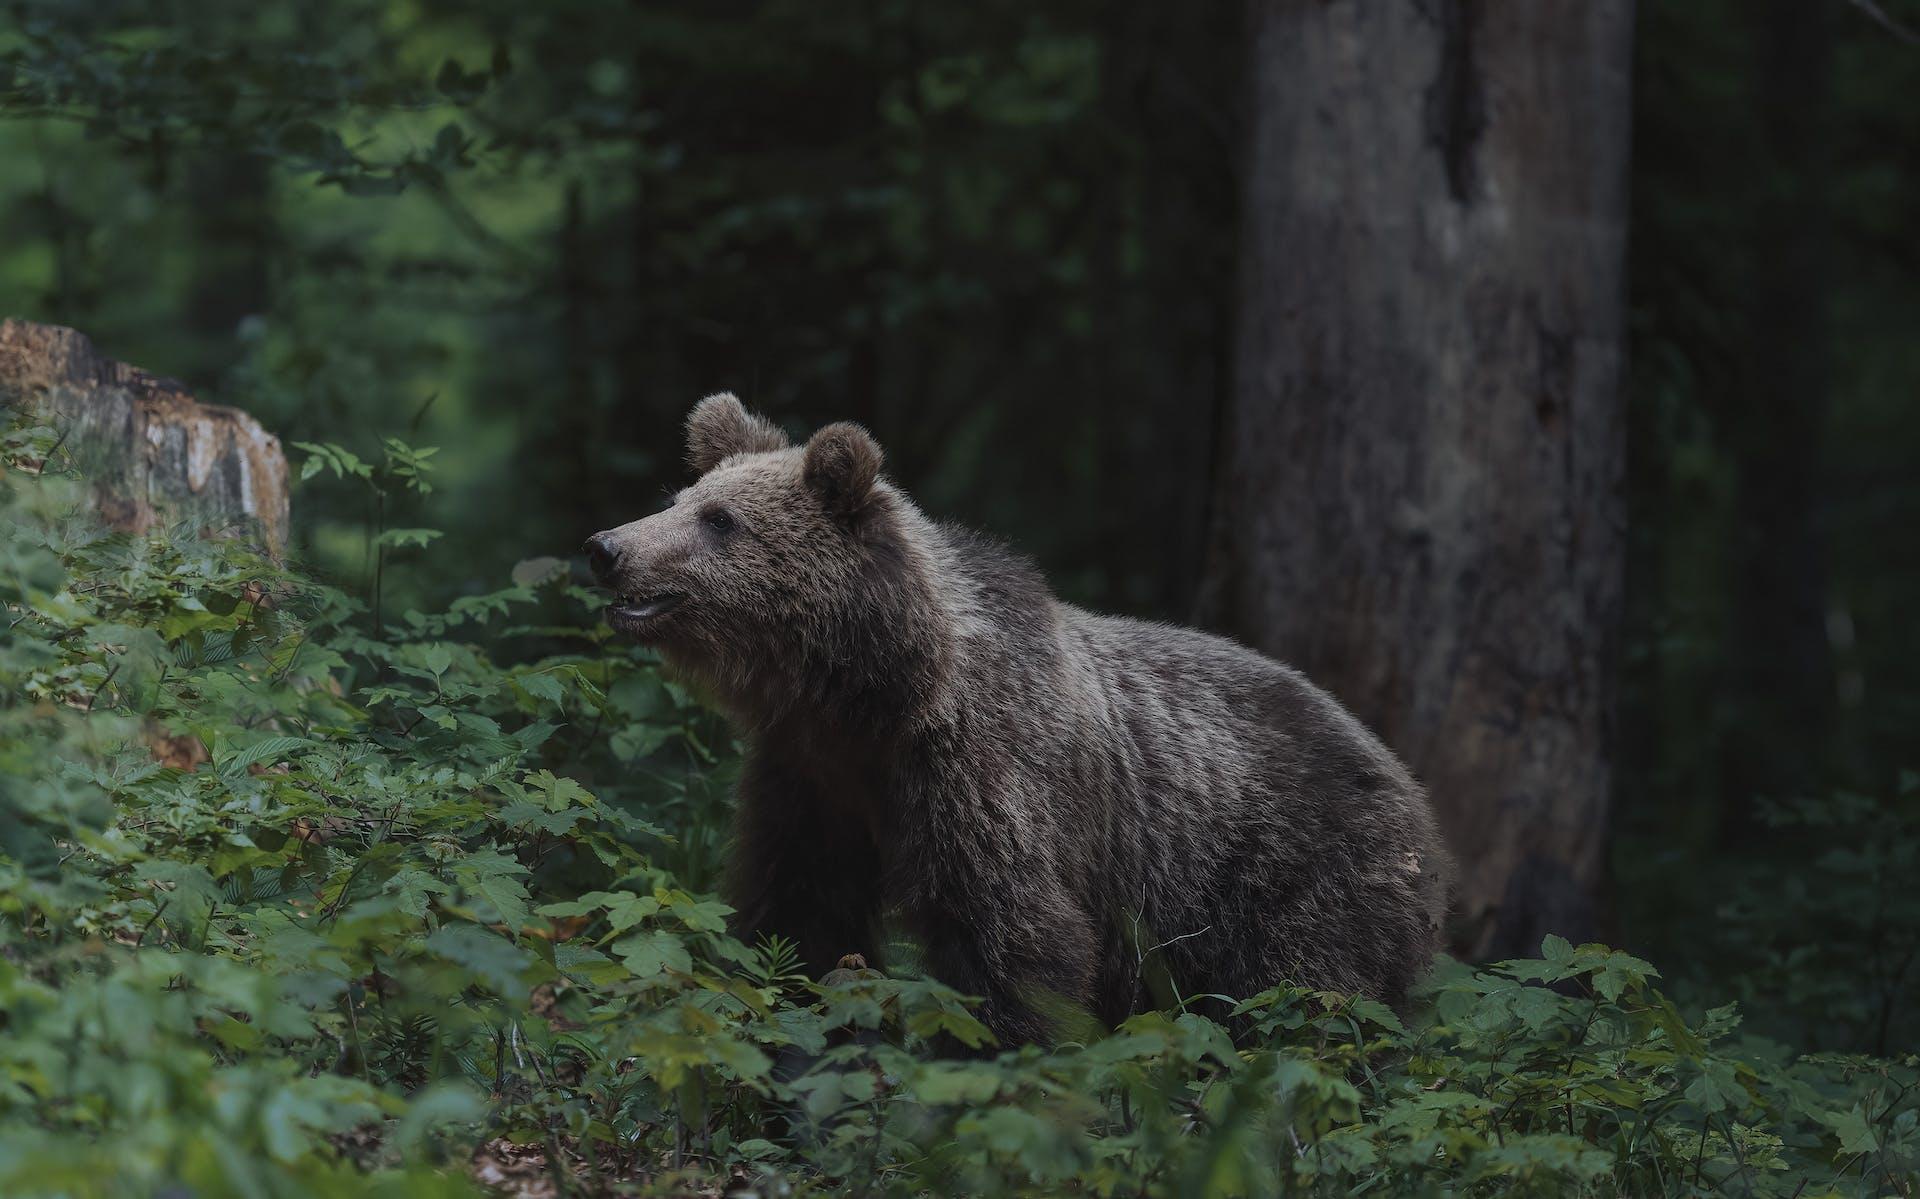 Man Narrates Bear ATTACK After Narrowly Escaping With His Life